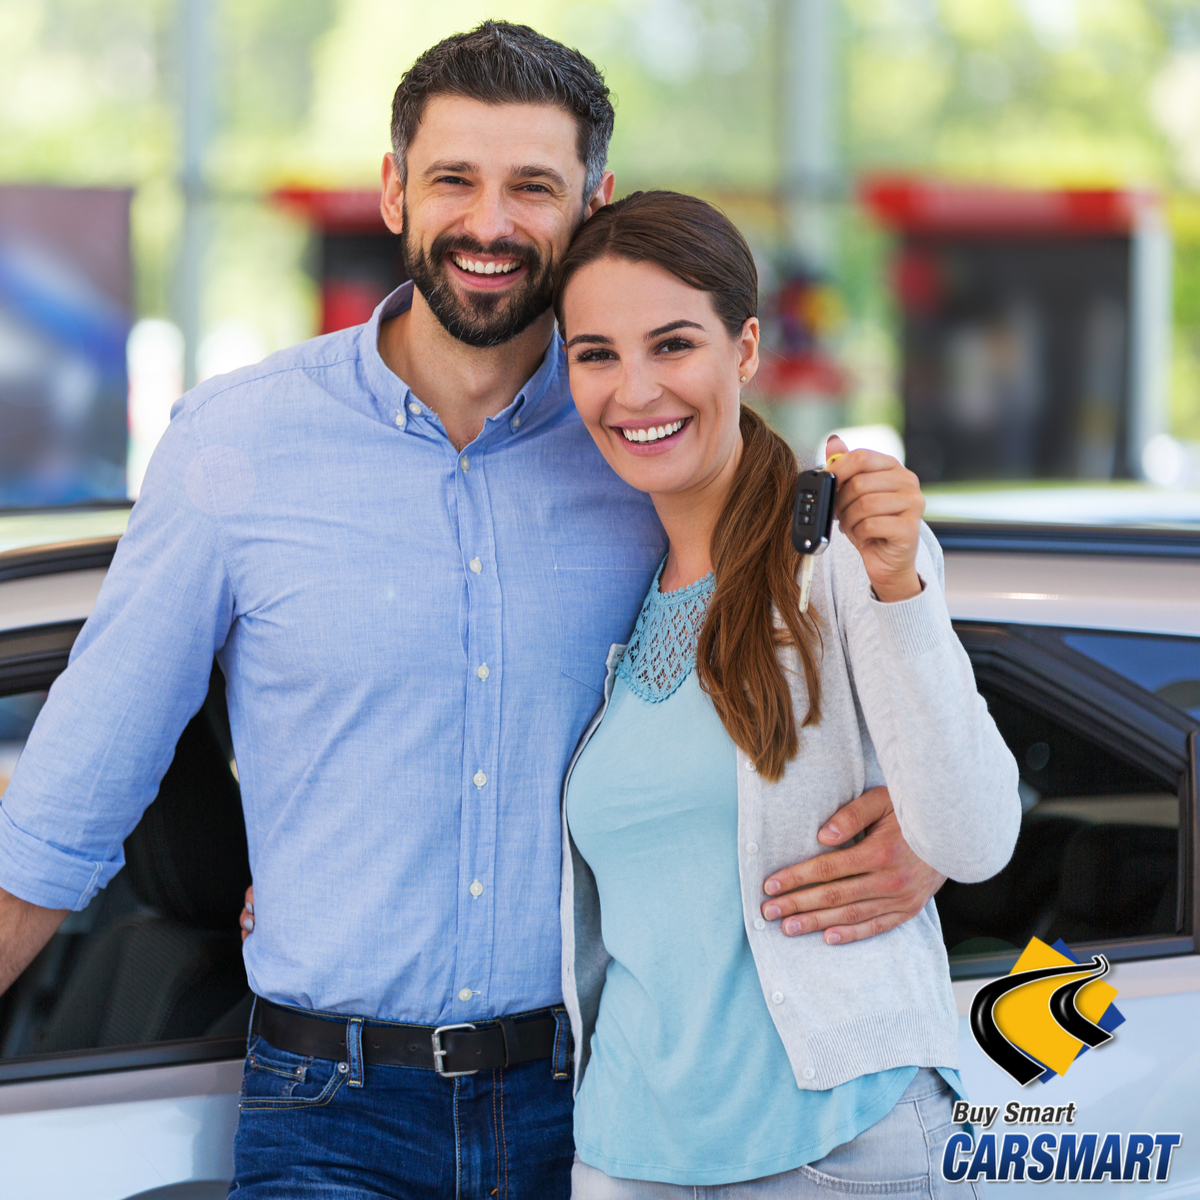 Where’s the Best Place to Shop for Low Mileage Cars Near Camp Springs?